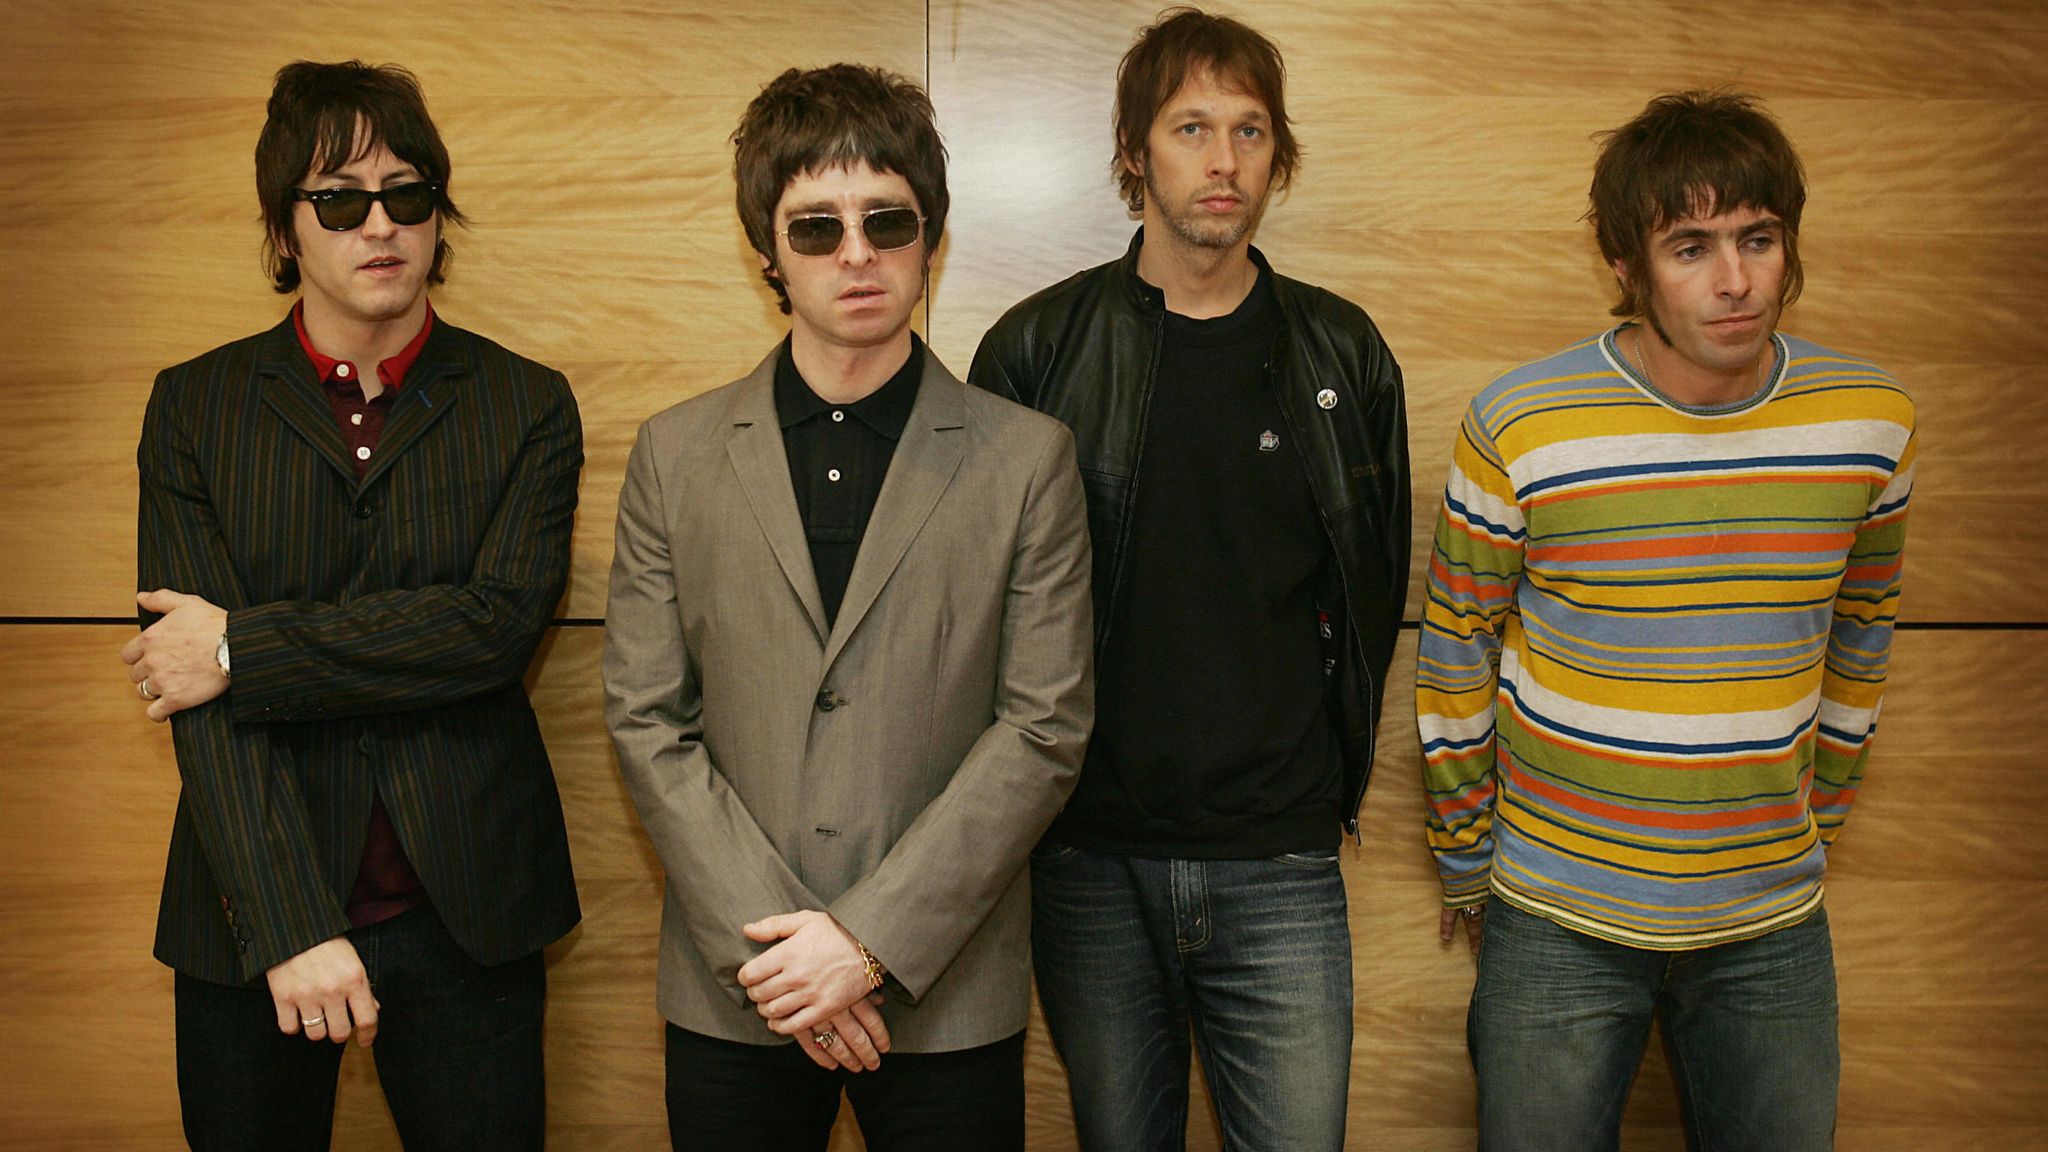 Lost Oasis song released after old CD found 'lying around', Noel